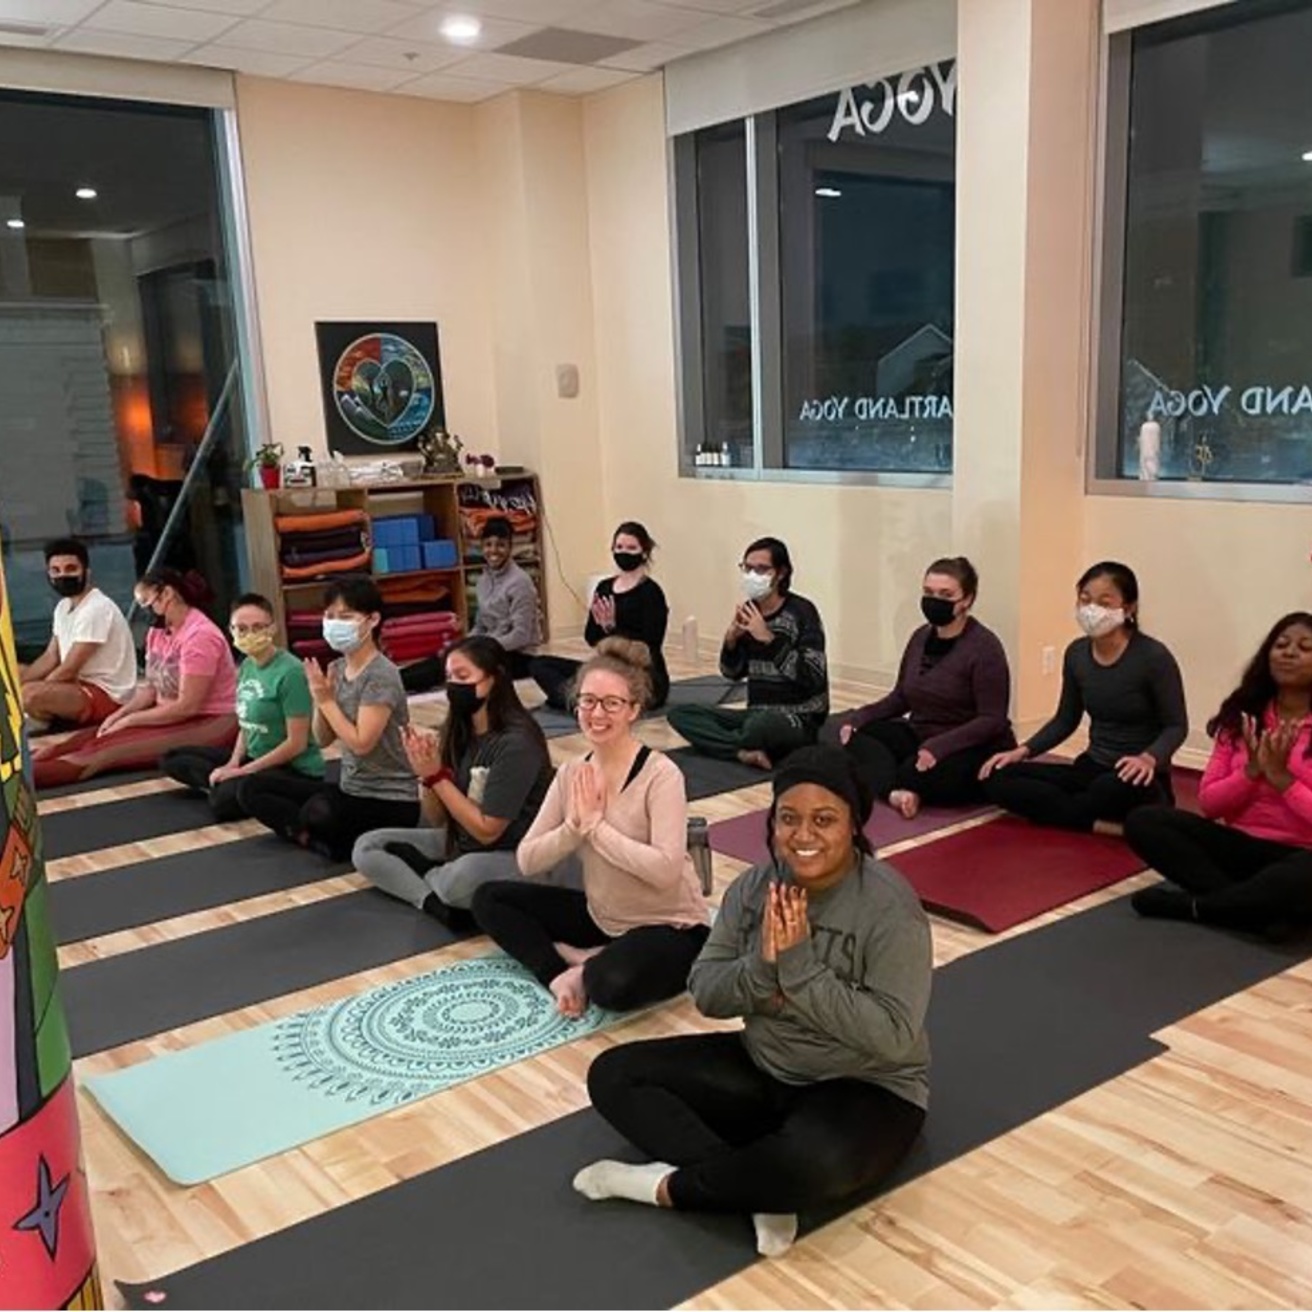 People smiling at the camera while sitting on yoga mats during a BGP event